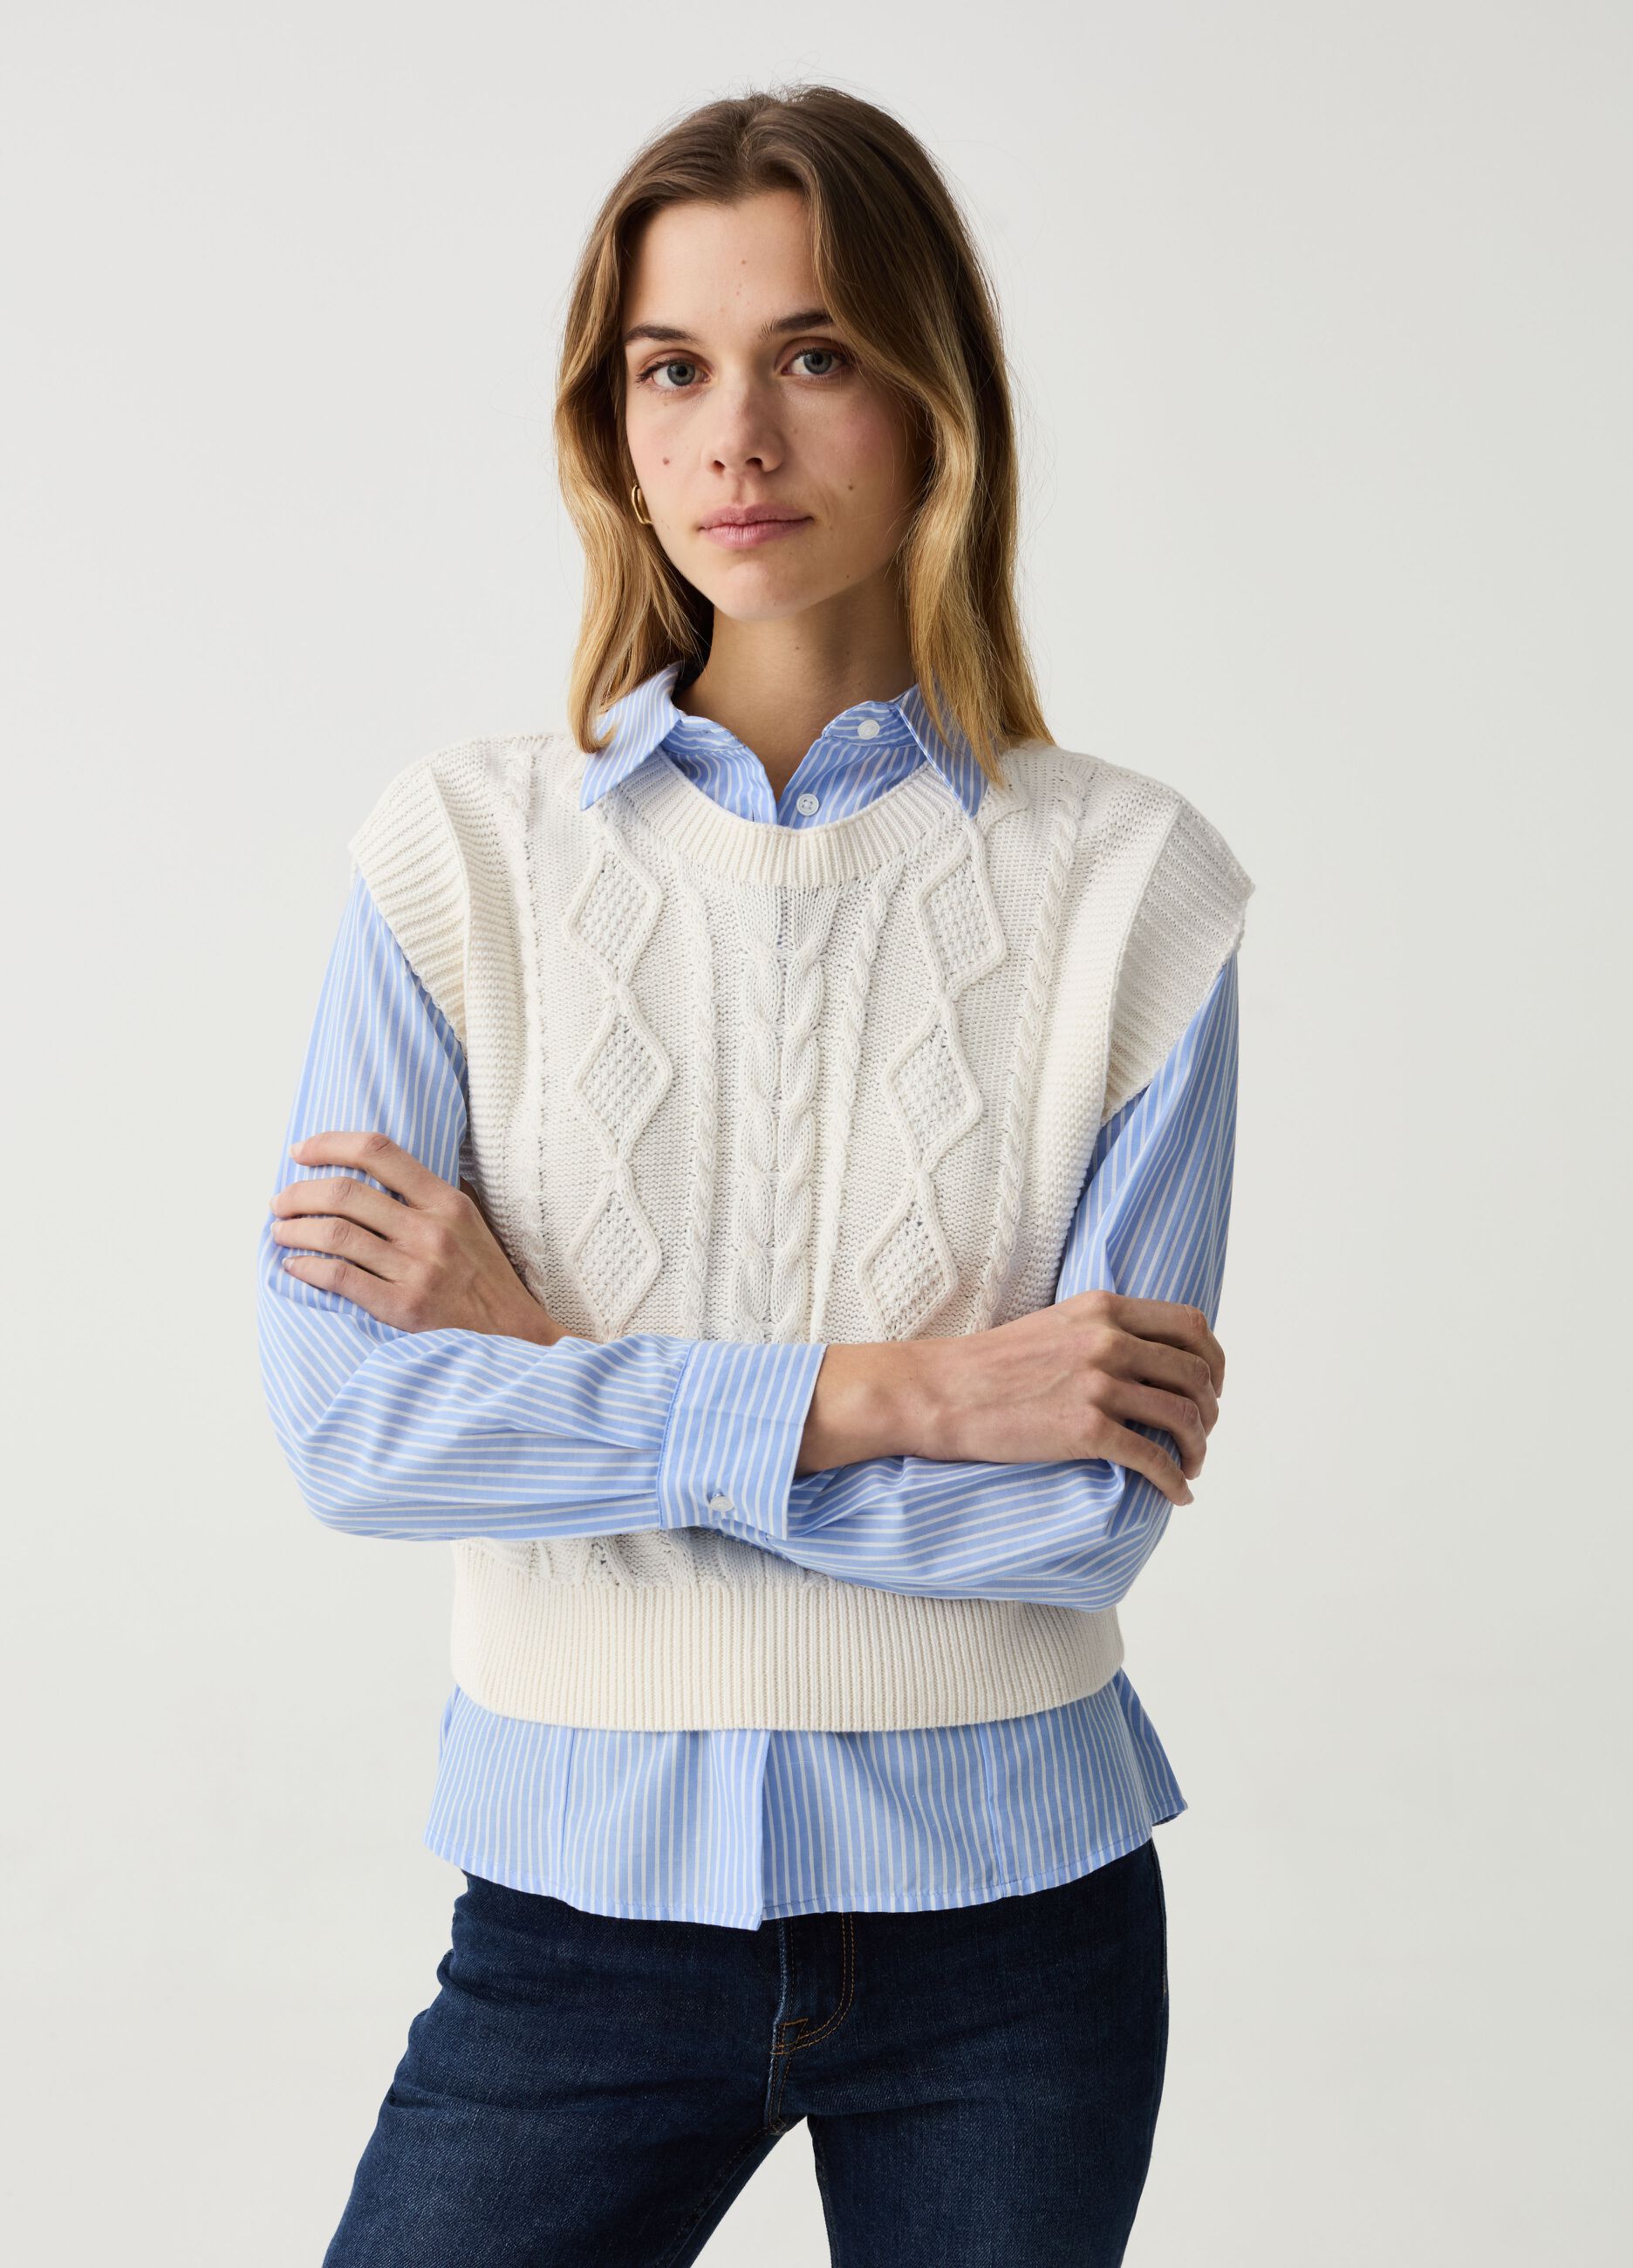 Closed gilet with cable-knit design